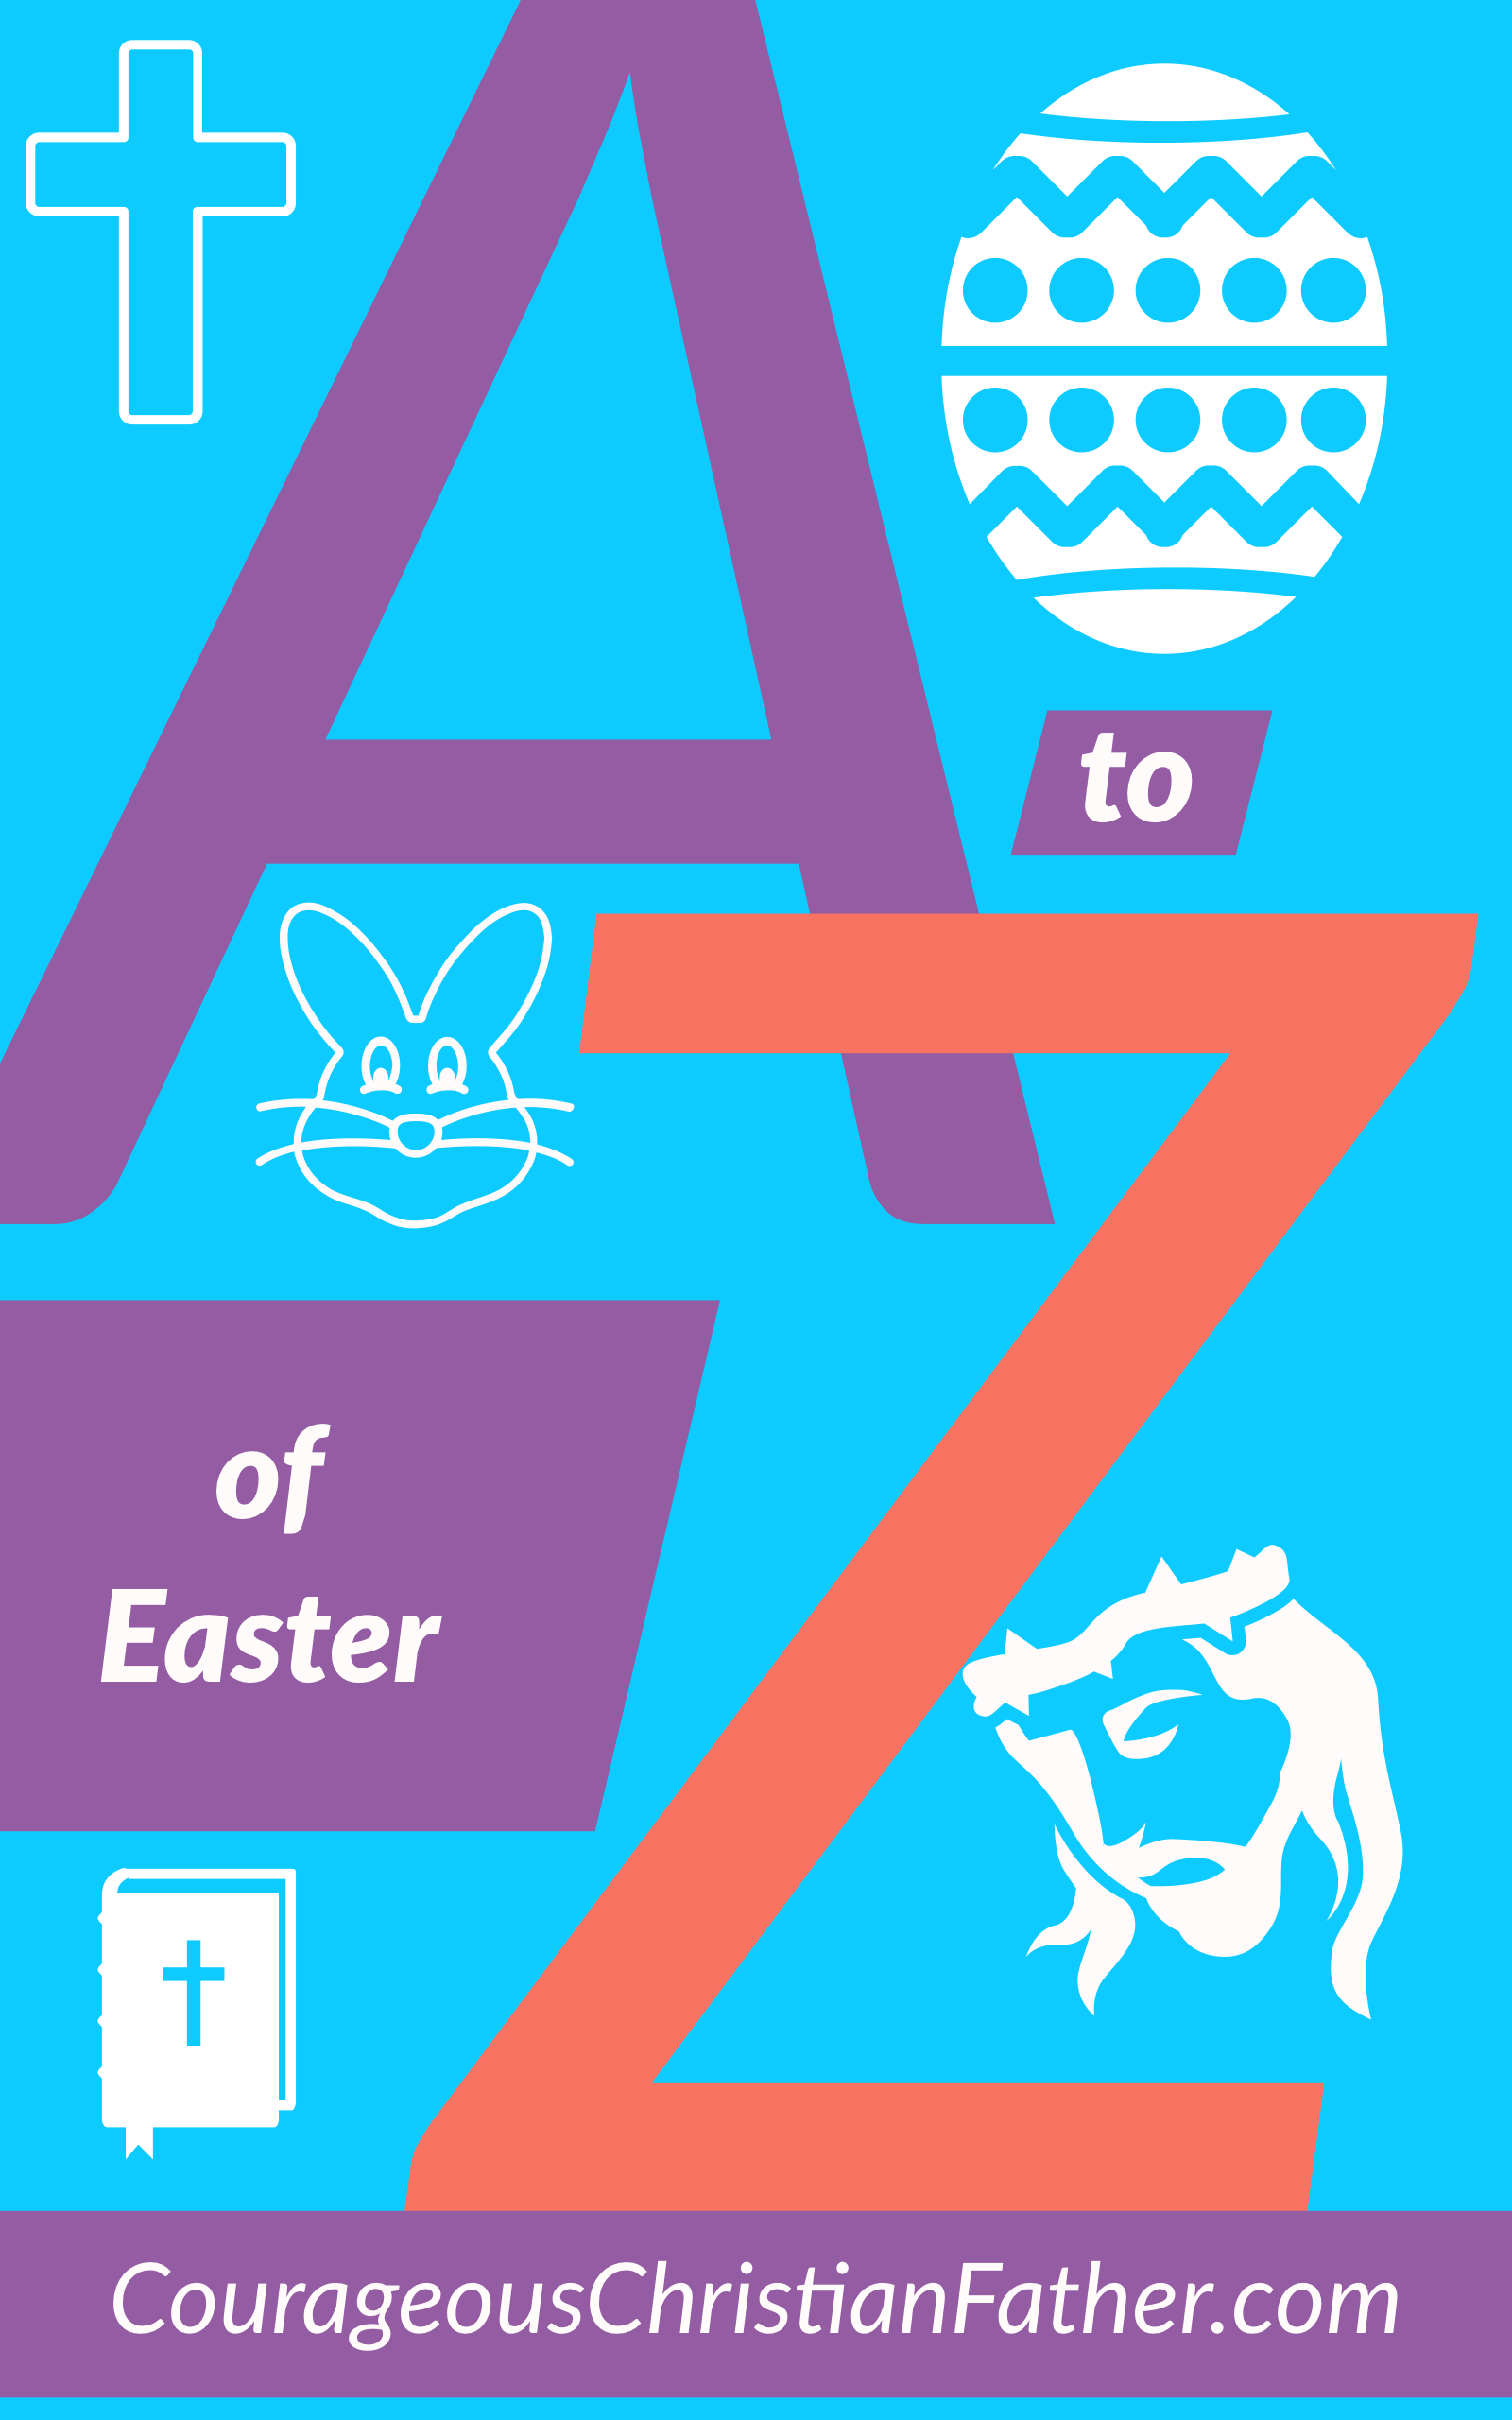 The A-Z of Easter - I take each letter of the alphabet and give a word that is related to Easter. I start with A and end with Z. #Easter